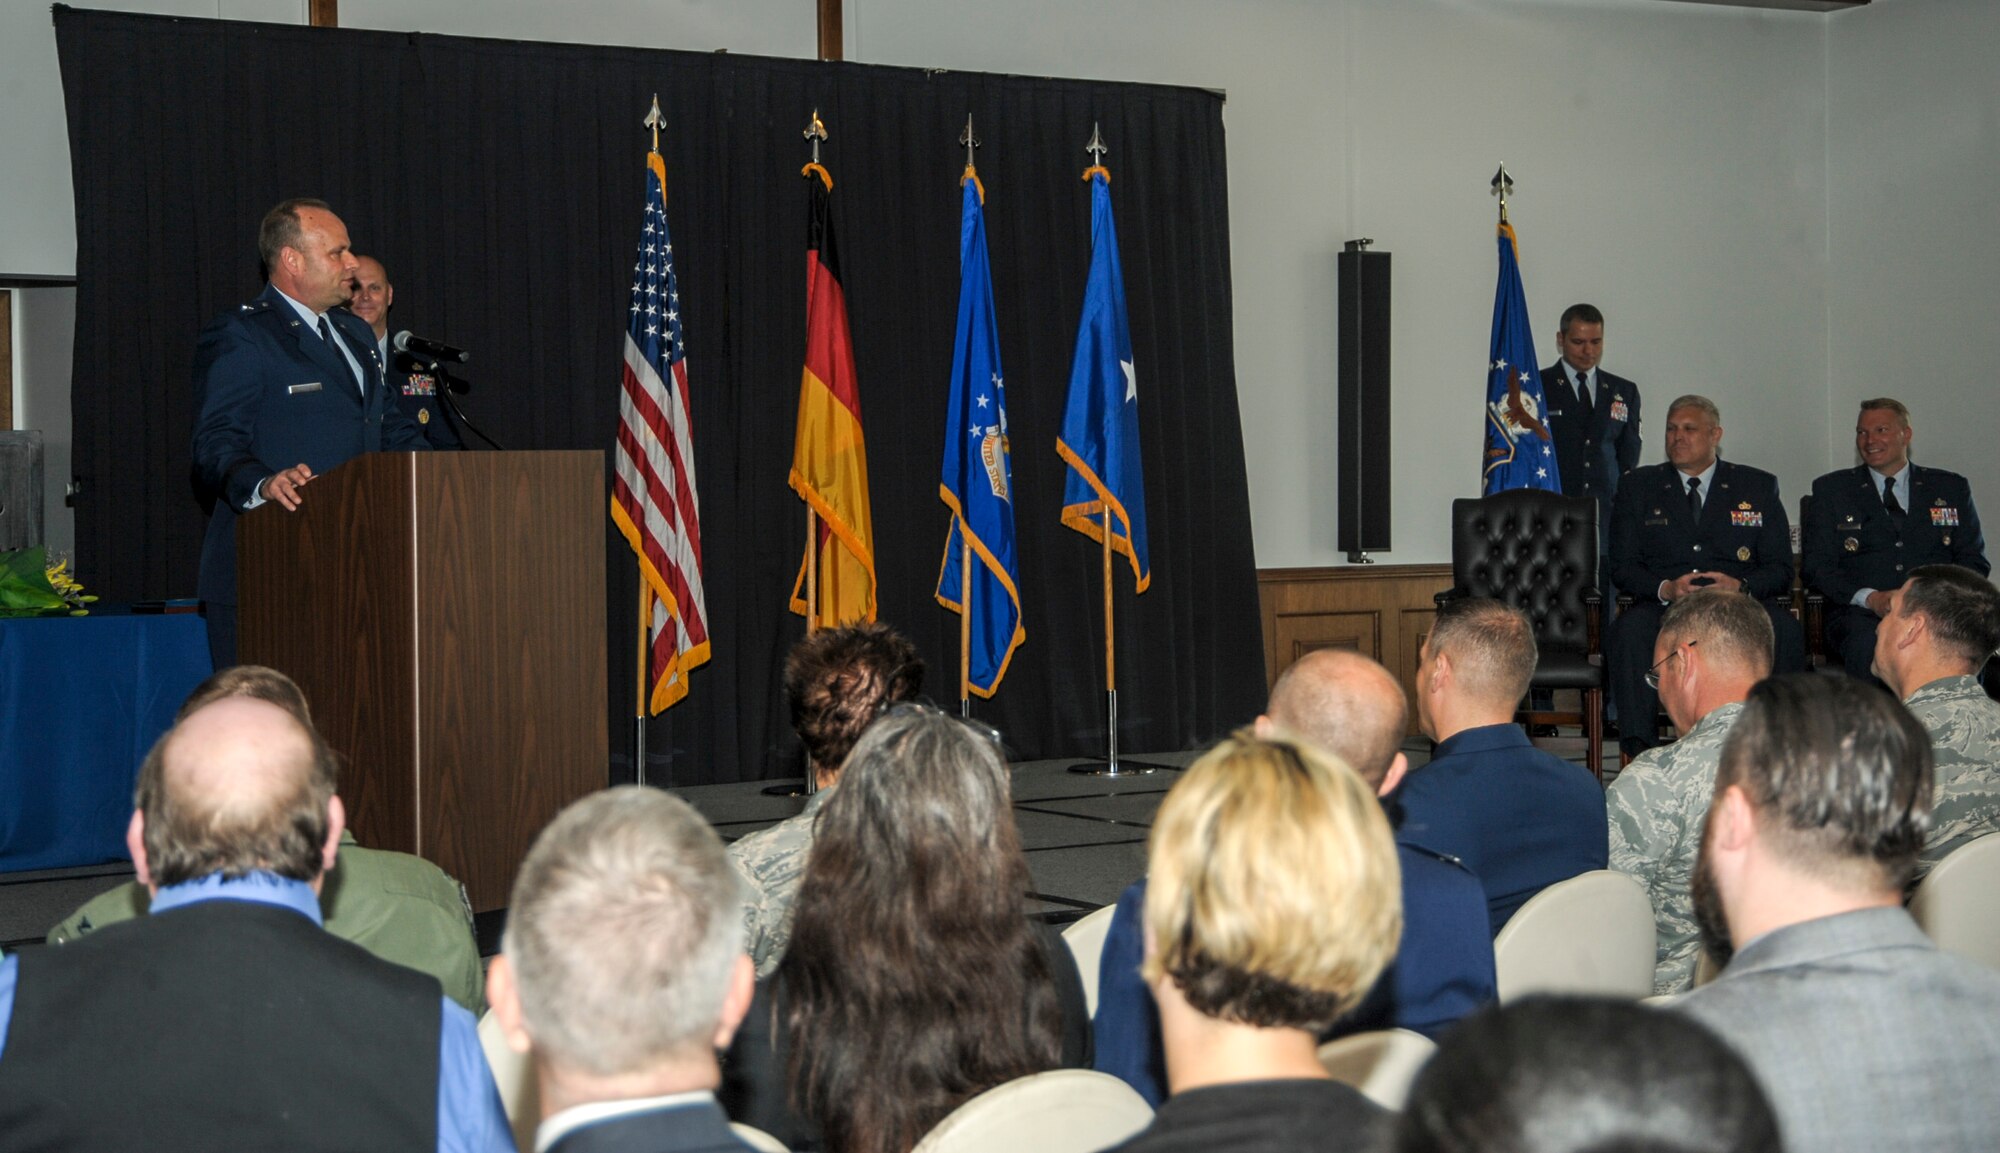 Brig. Gen. Keith Givens, commander of Air Force Office of Special Investigations, Quantico, Virginia, gives his remarks during the 5th Field Investigations Region change of command ceremony, June 29, 2016, at Ramstein Air Base, Germany. Members of the Kaiserslautern Military Community came together as Col. Shan Nuckols took command of the 5th FIR from Col James Hudson. (U.S. Air Force photo/Staff Sgt. Timothy Moore)